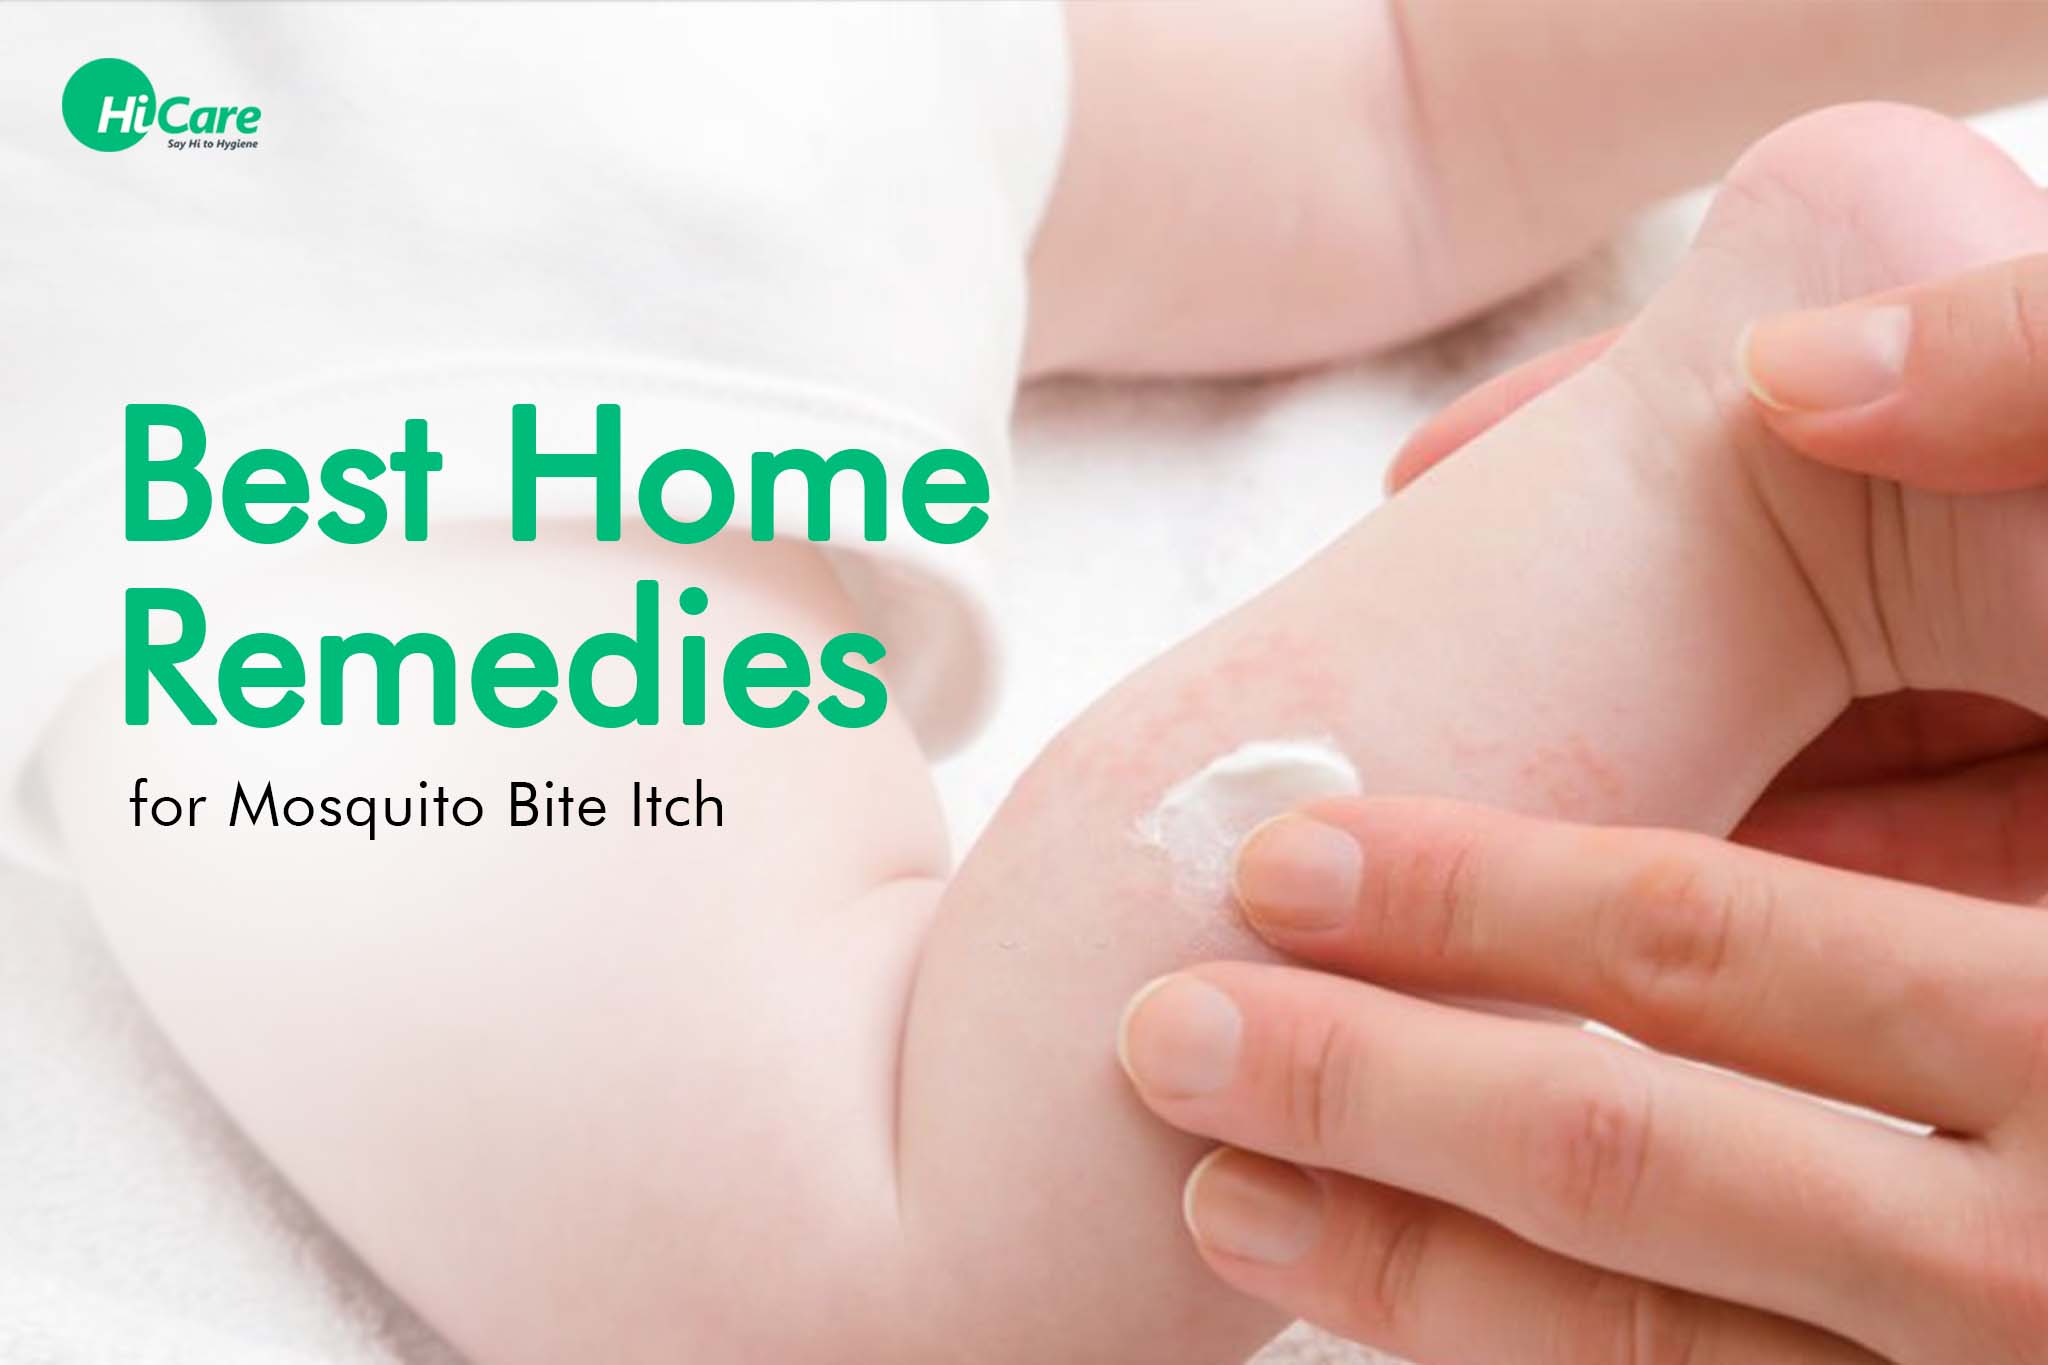 10 Best Home Remedies for Mosquito Bite Itch